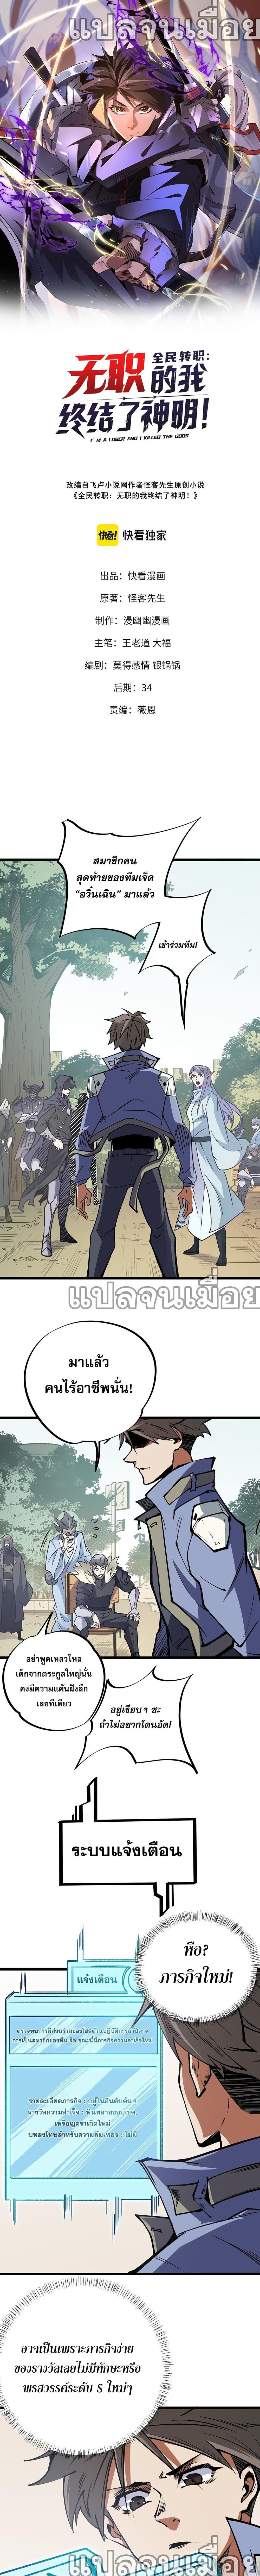 Job Changing for the Entire Population: The Jobless Me Will Terminate the Gods ฉันคือผู้เล่นไร้อาชีพที่สังหารเหล่าเทพ 50-50